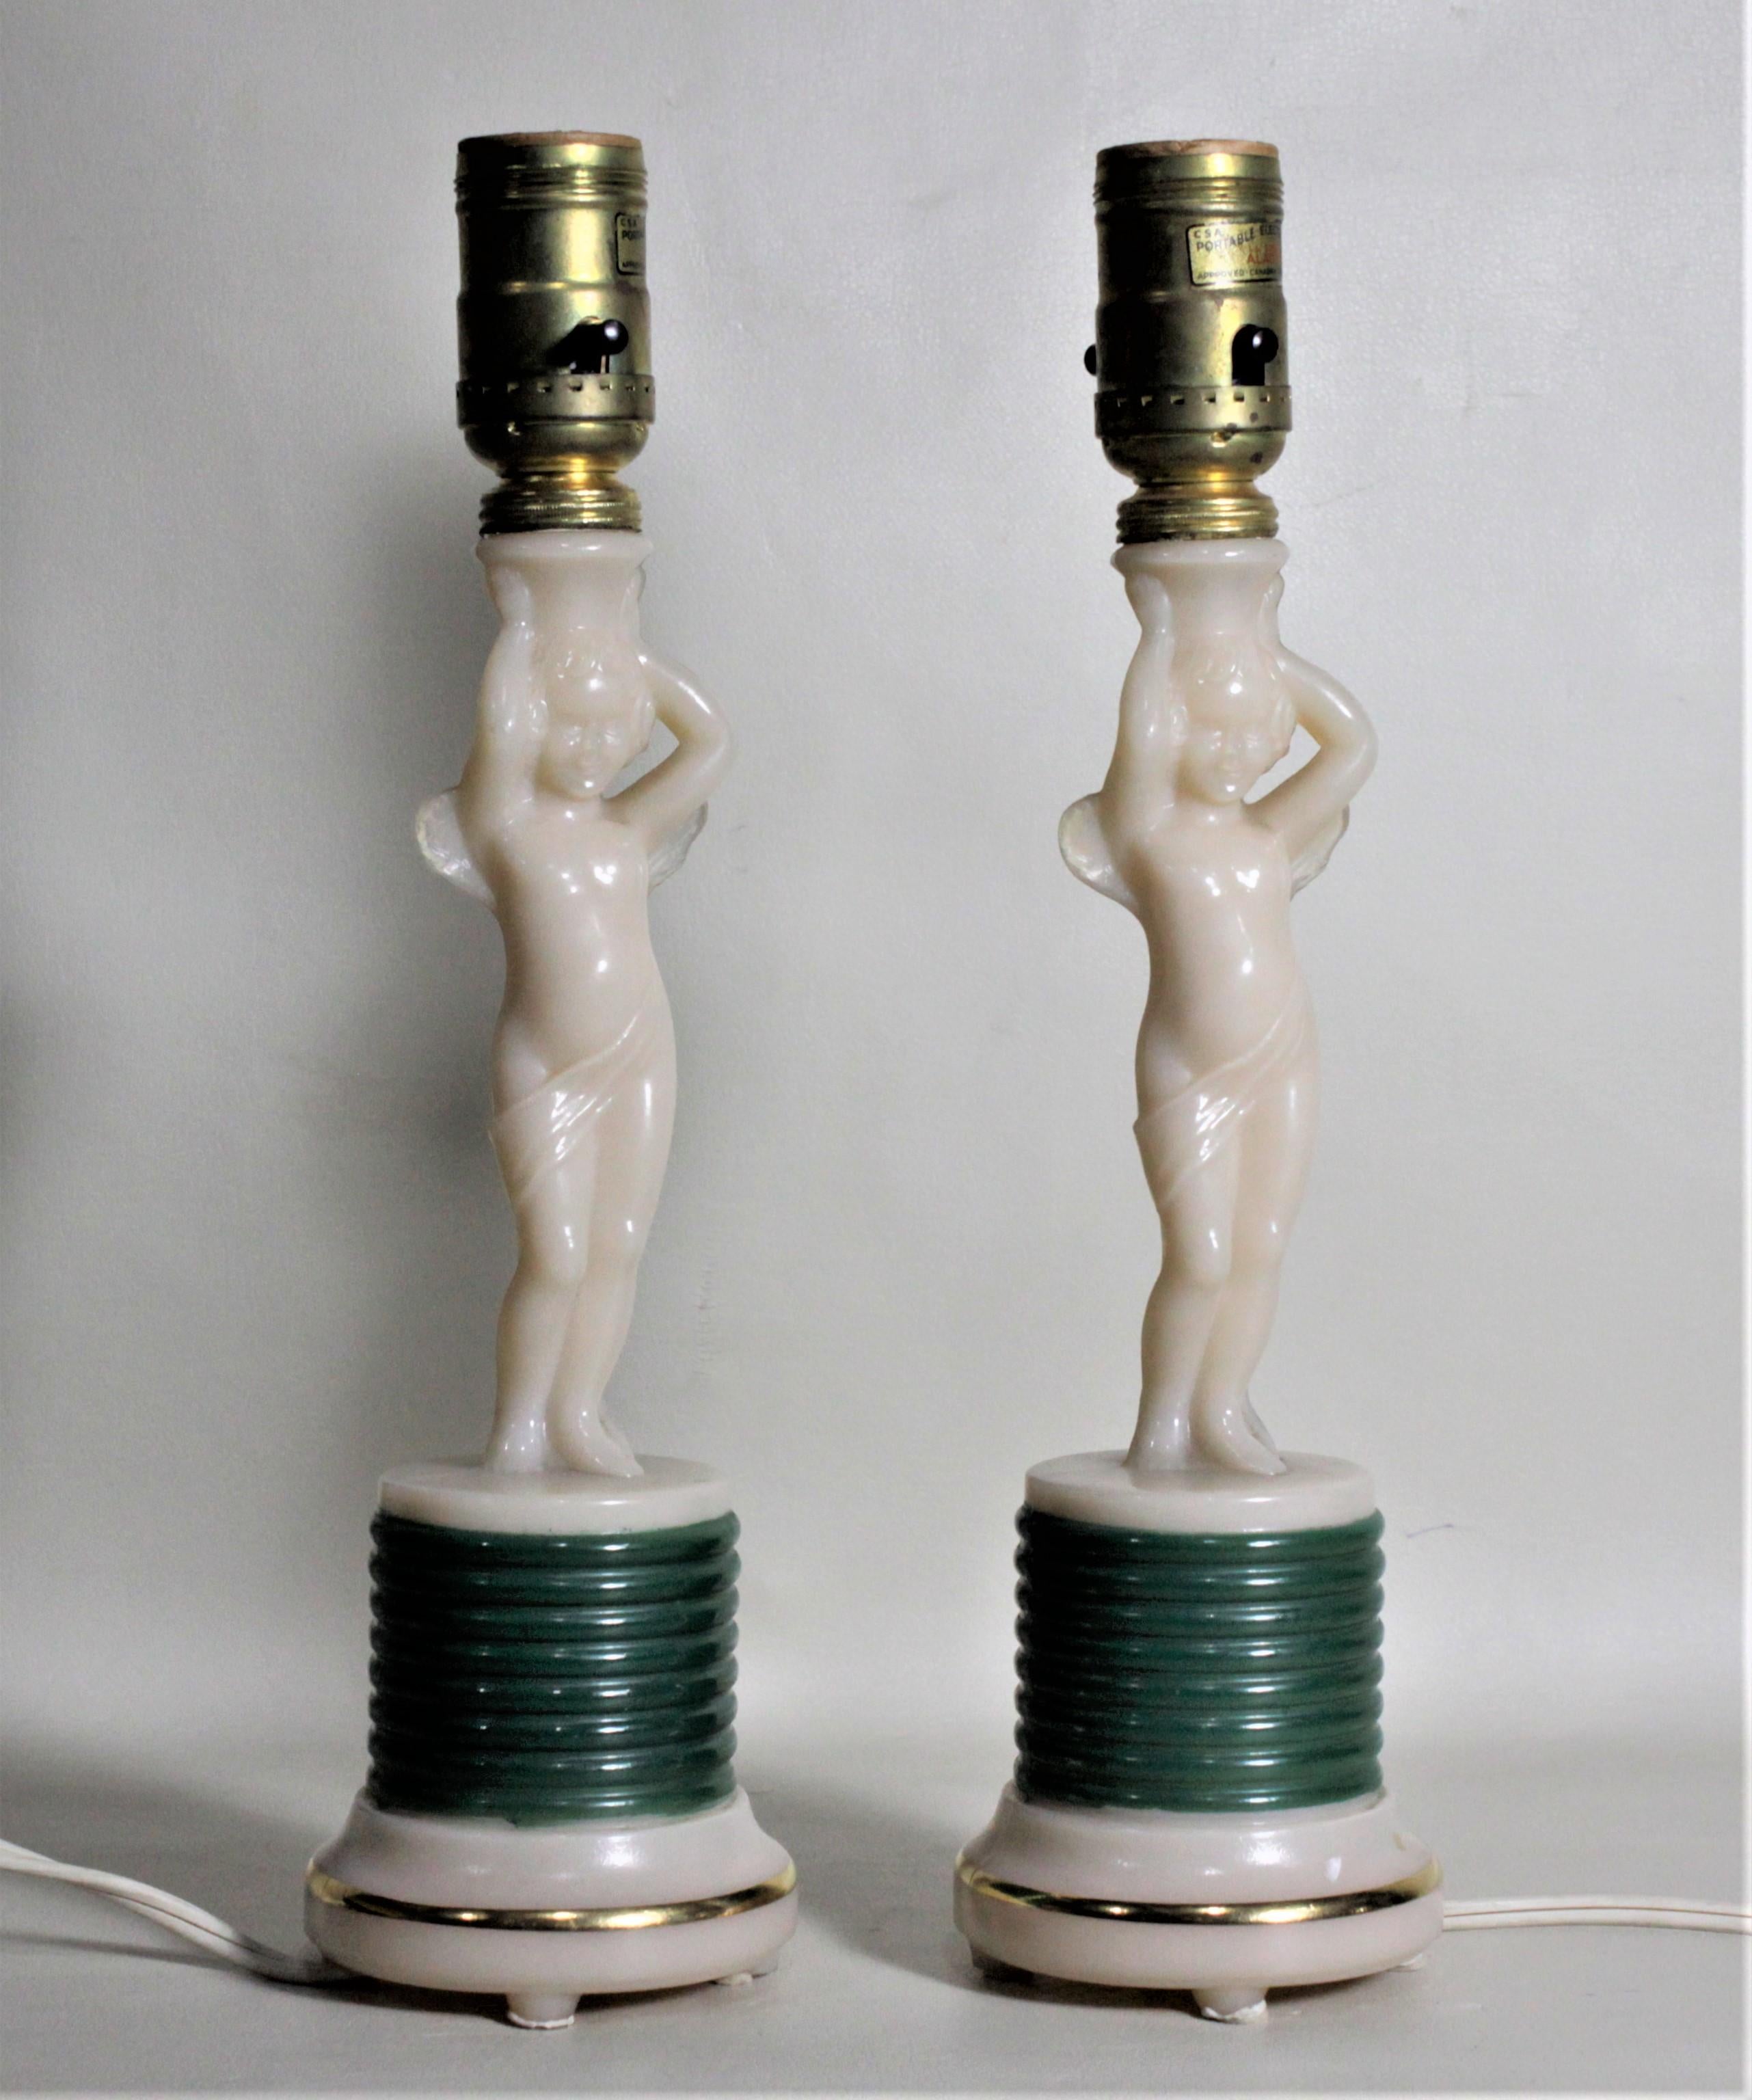 This pair of Art Deco figural winged cherub table lamp bases were produced by the Aladdin Company of the United States in circa 1935. The lamps are done in an alabaster toned glass or alacite and molded into sculptural cherubs on pedestal bases. The